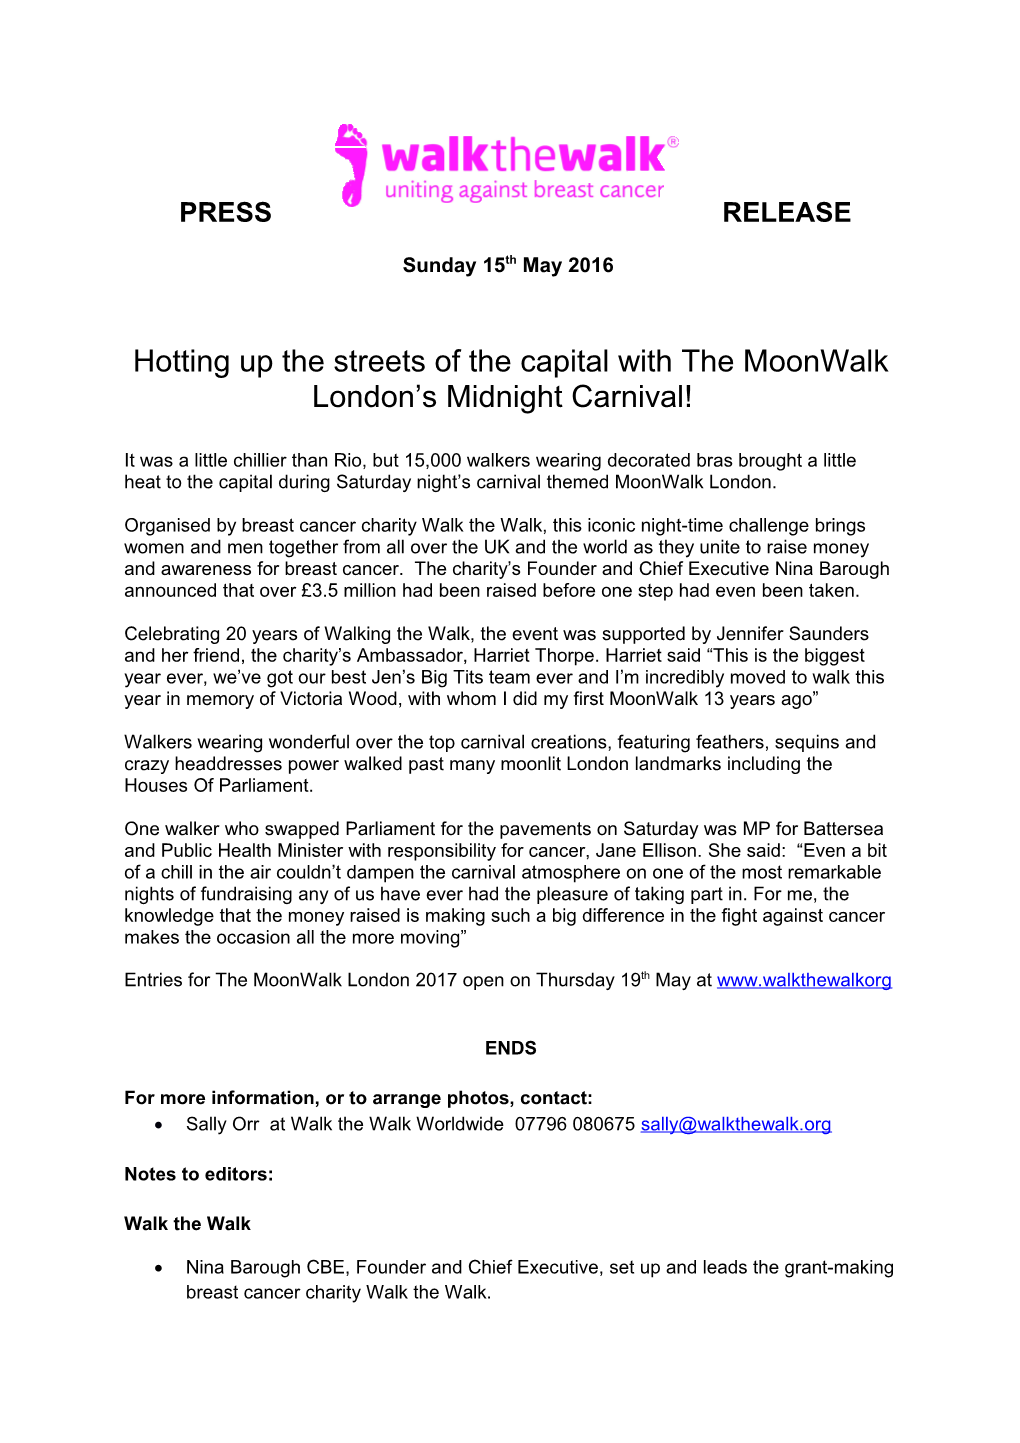 Hotting up the Streets of the Capital with the Moonwalk London S Midnight Carnival!